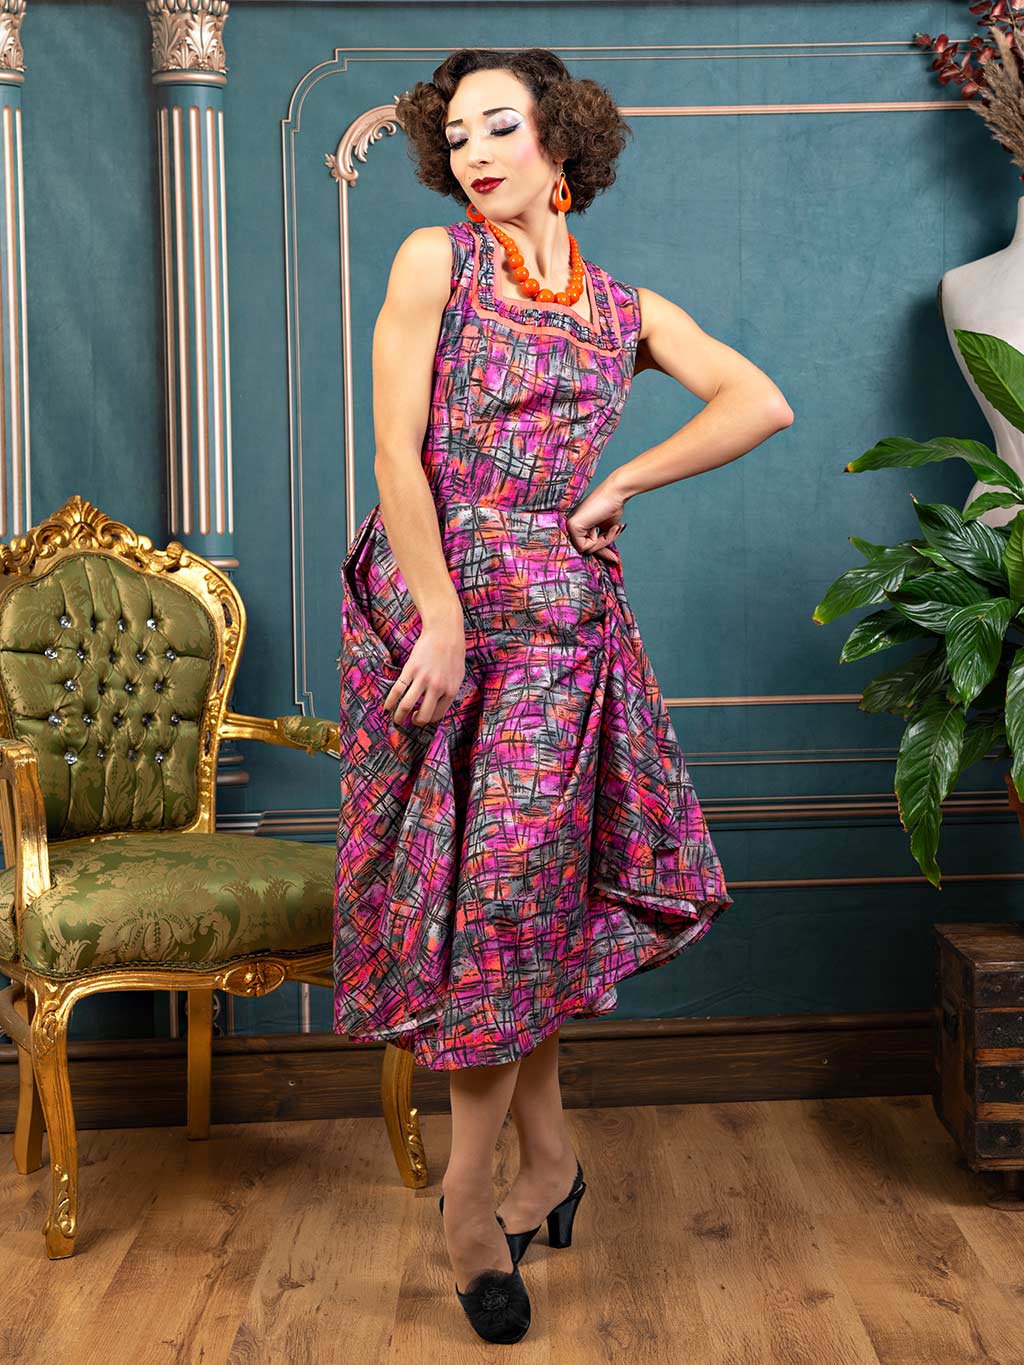 vintage dress in a colourful 1950s abstract print